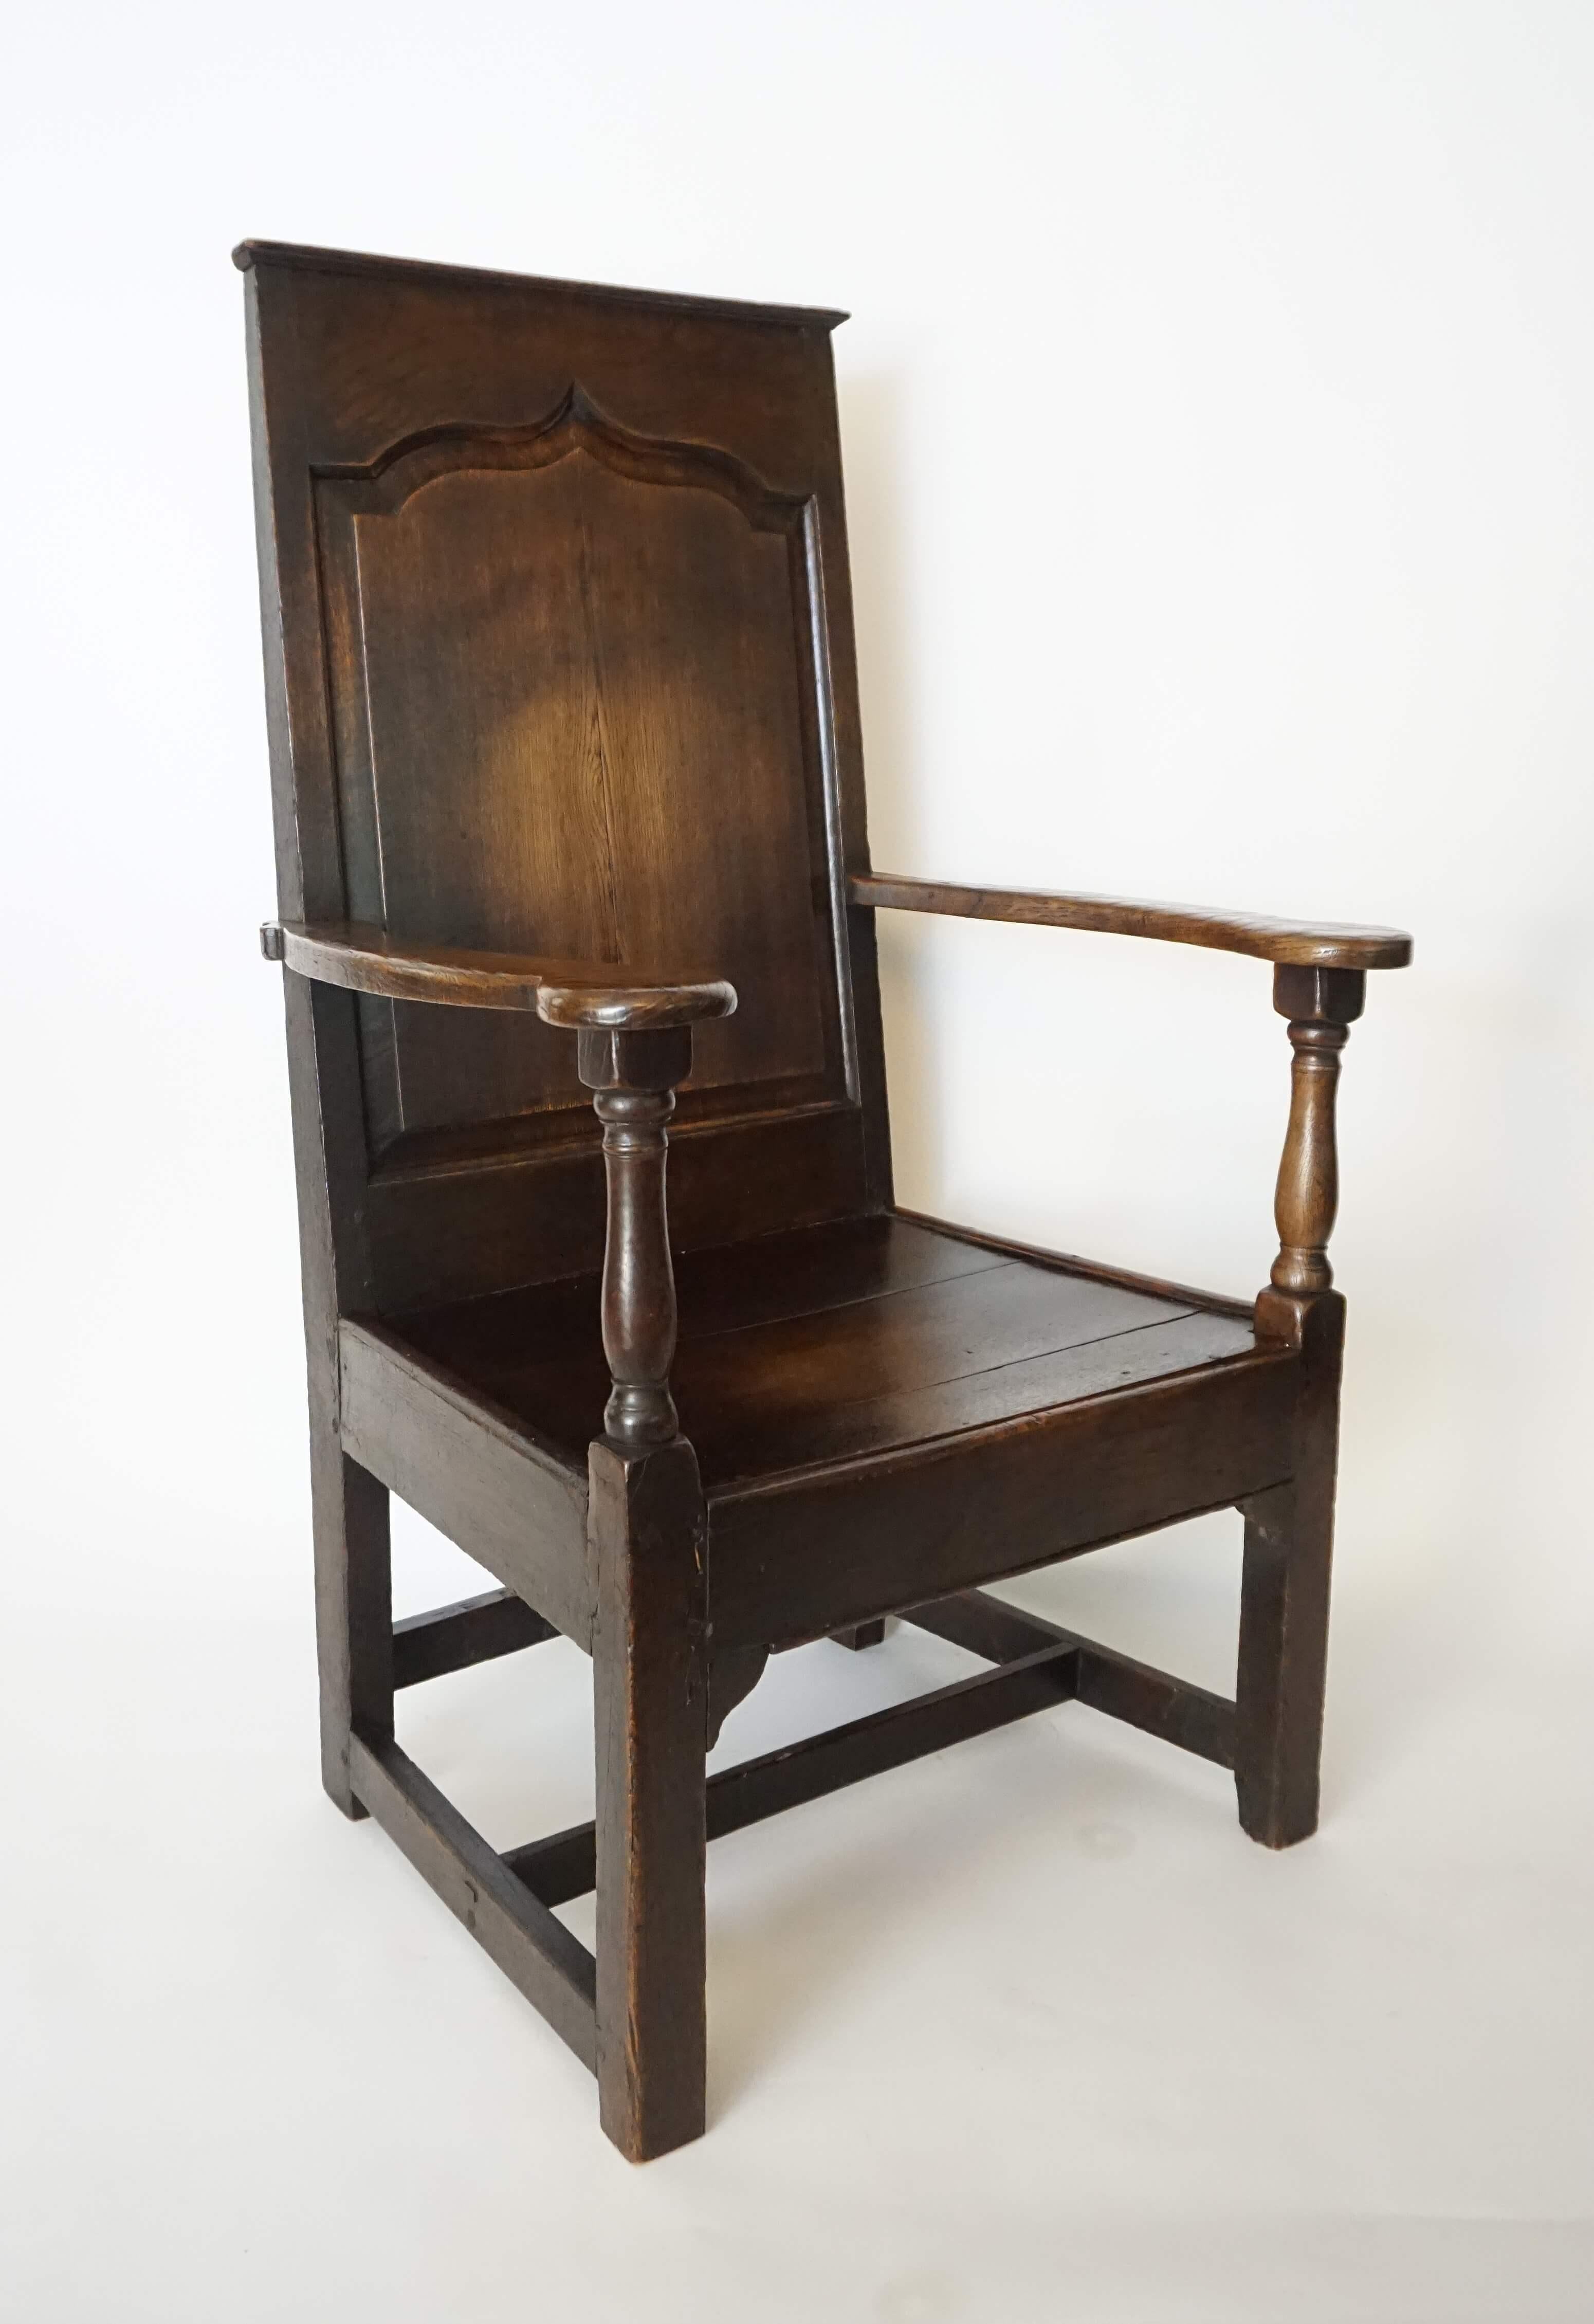 English Georgian wainscot armchair having carved elm frame, the 'Gothick' cusped-arch raised-panel rectangular back with molded crest-rail connecting bowed arms on turned balusters and plank seat atop Chippendale influenced bracketed-post form front